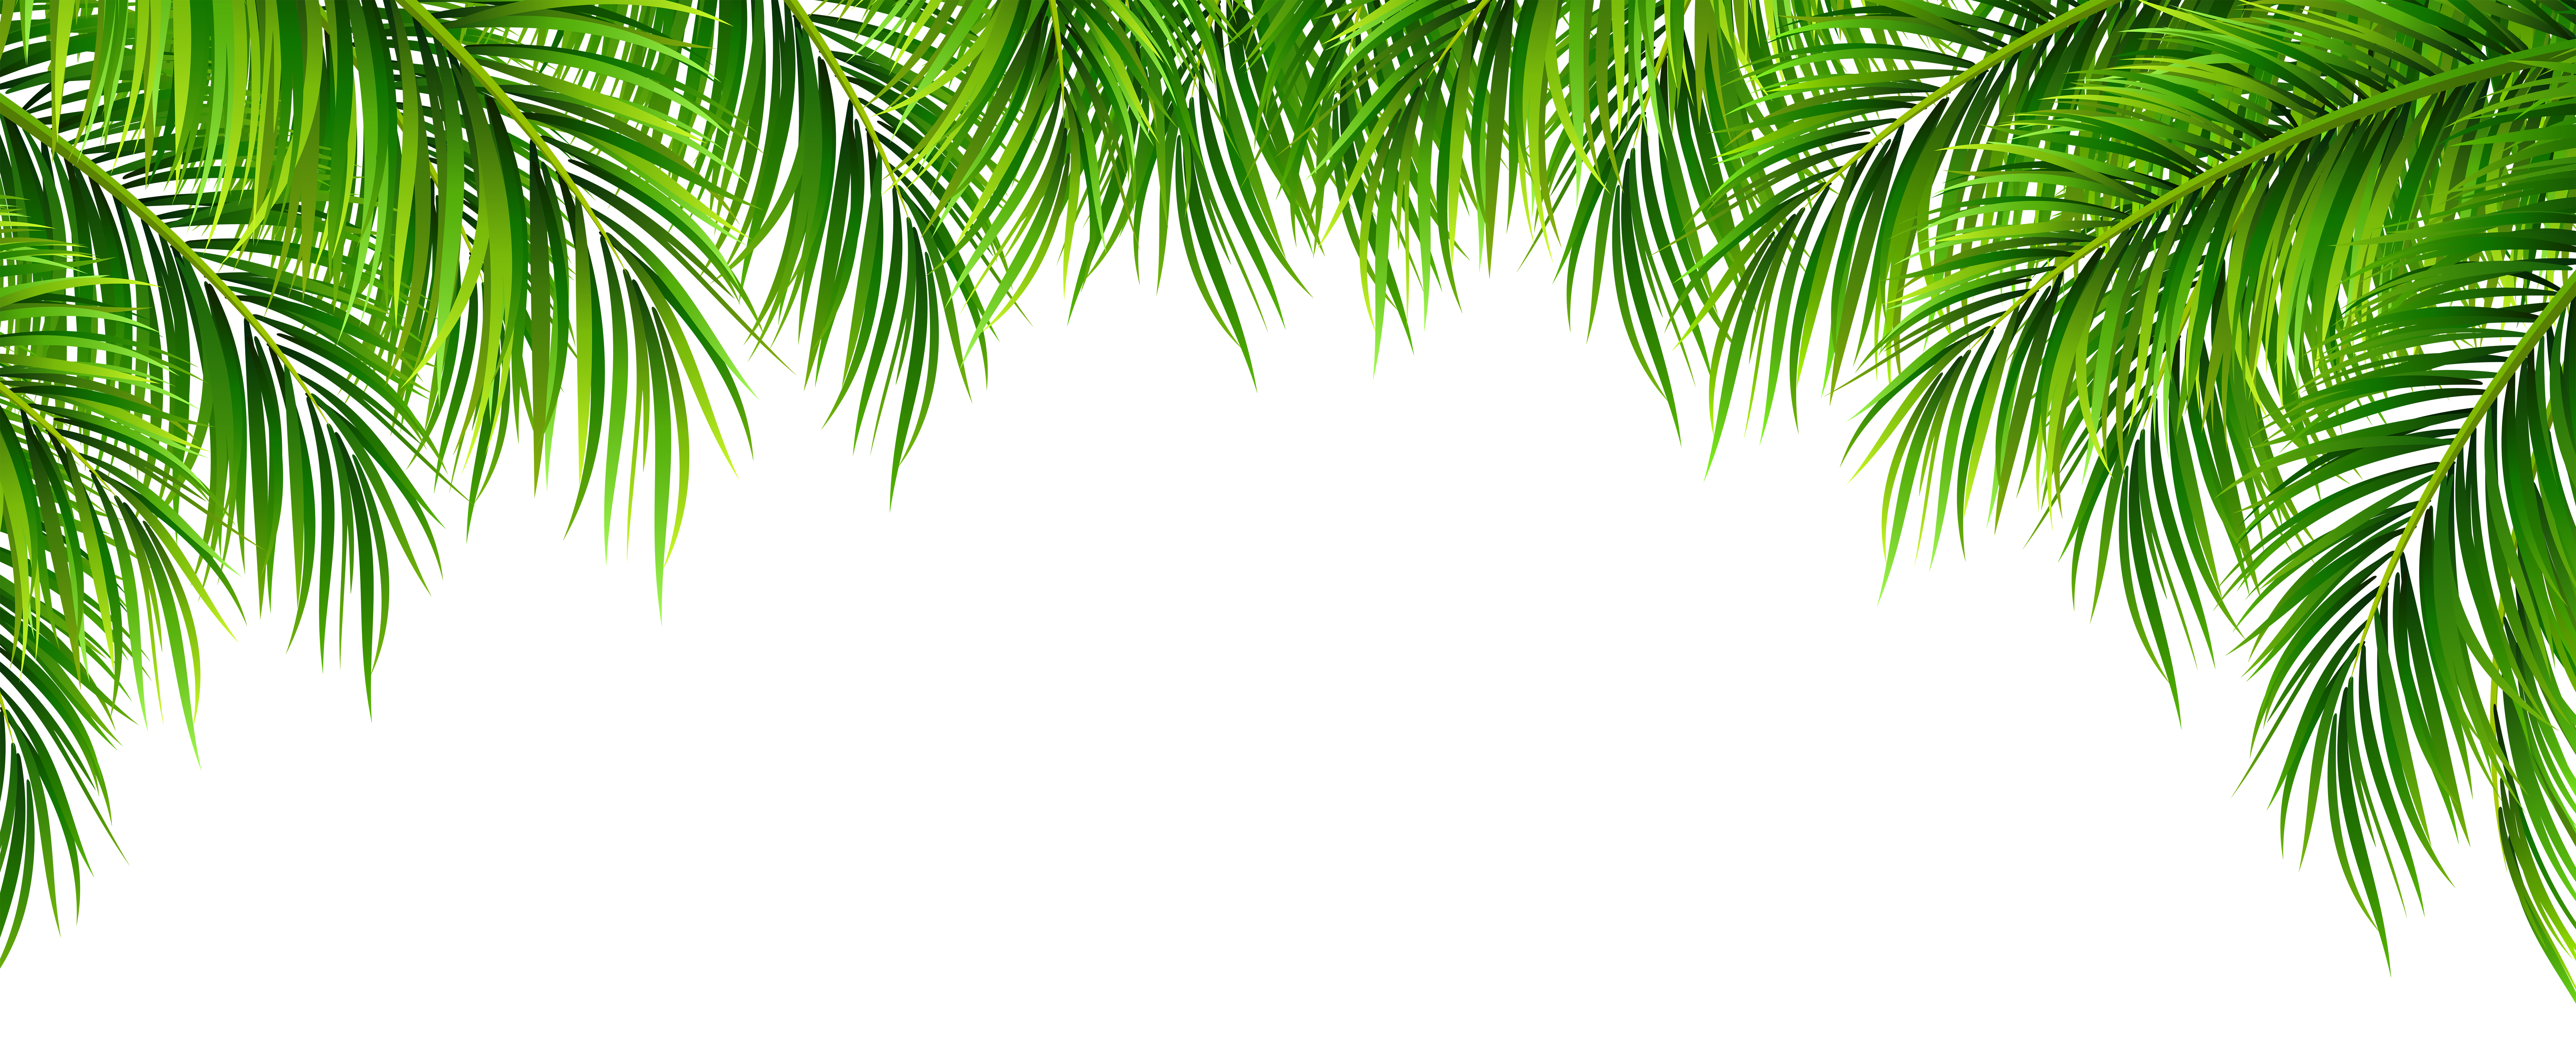 free clipart of palm leaves - photo #44